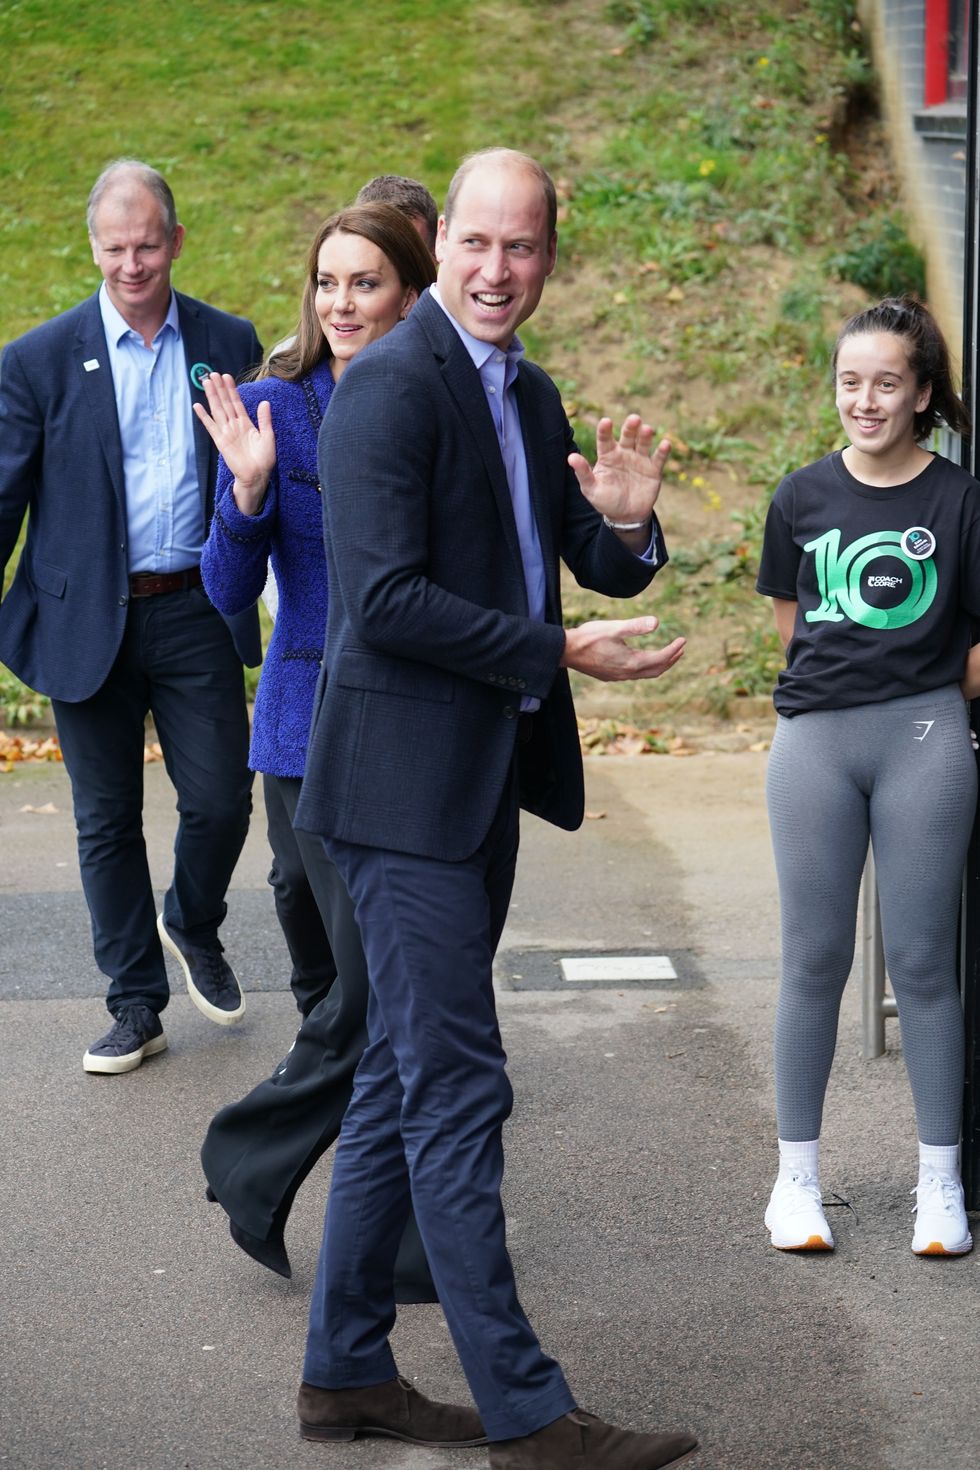 William and Kate join 10th anniversary celebration for sports charity Coach Core